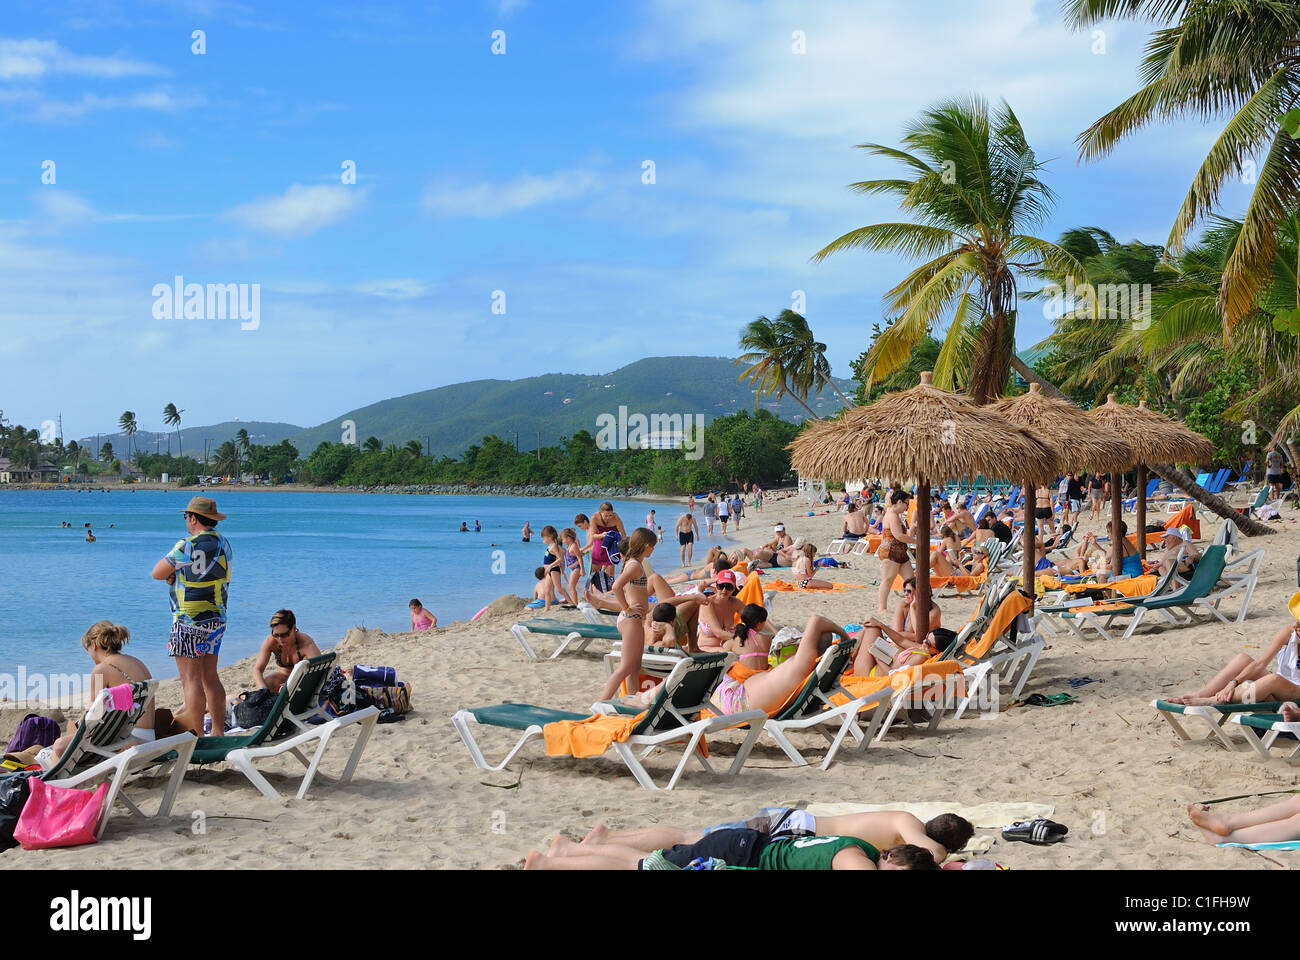 A beach with tourists on St. Thomas in the Virgin Islands. December 29, 2010. Stock Photo